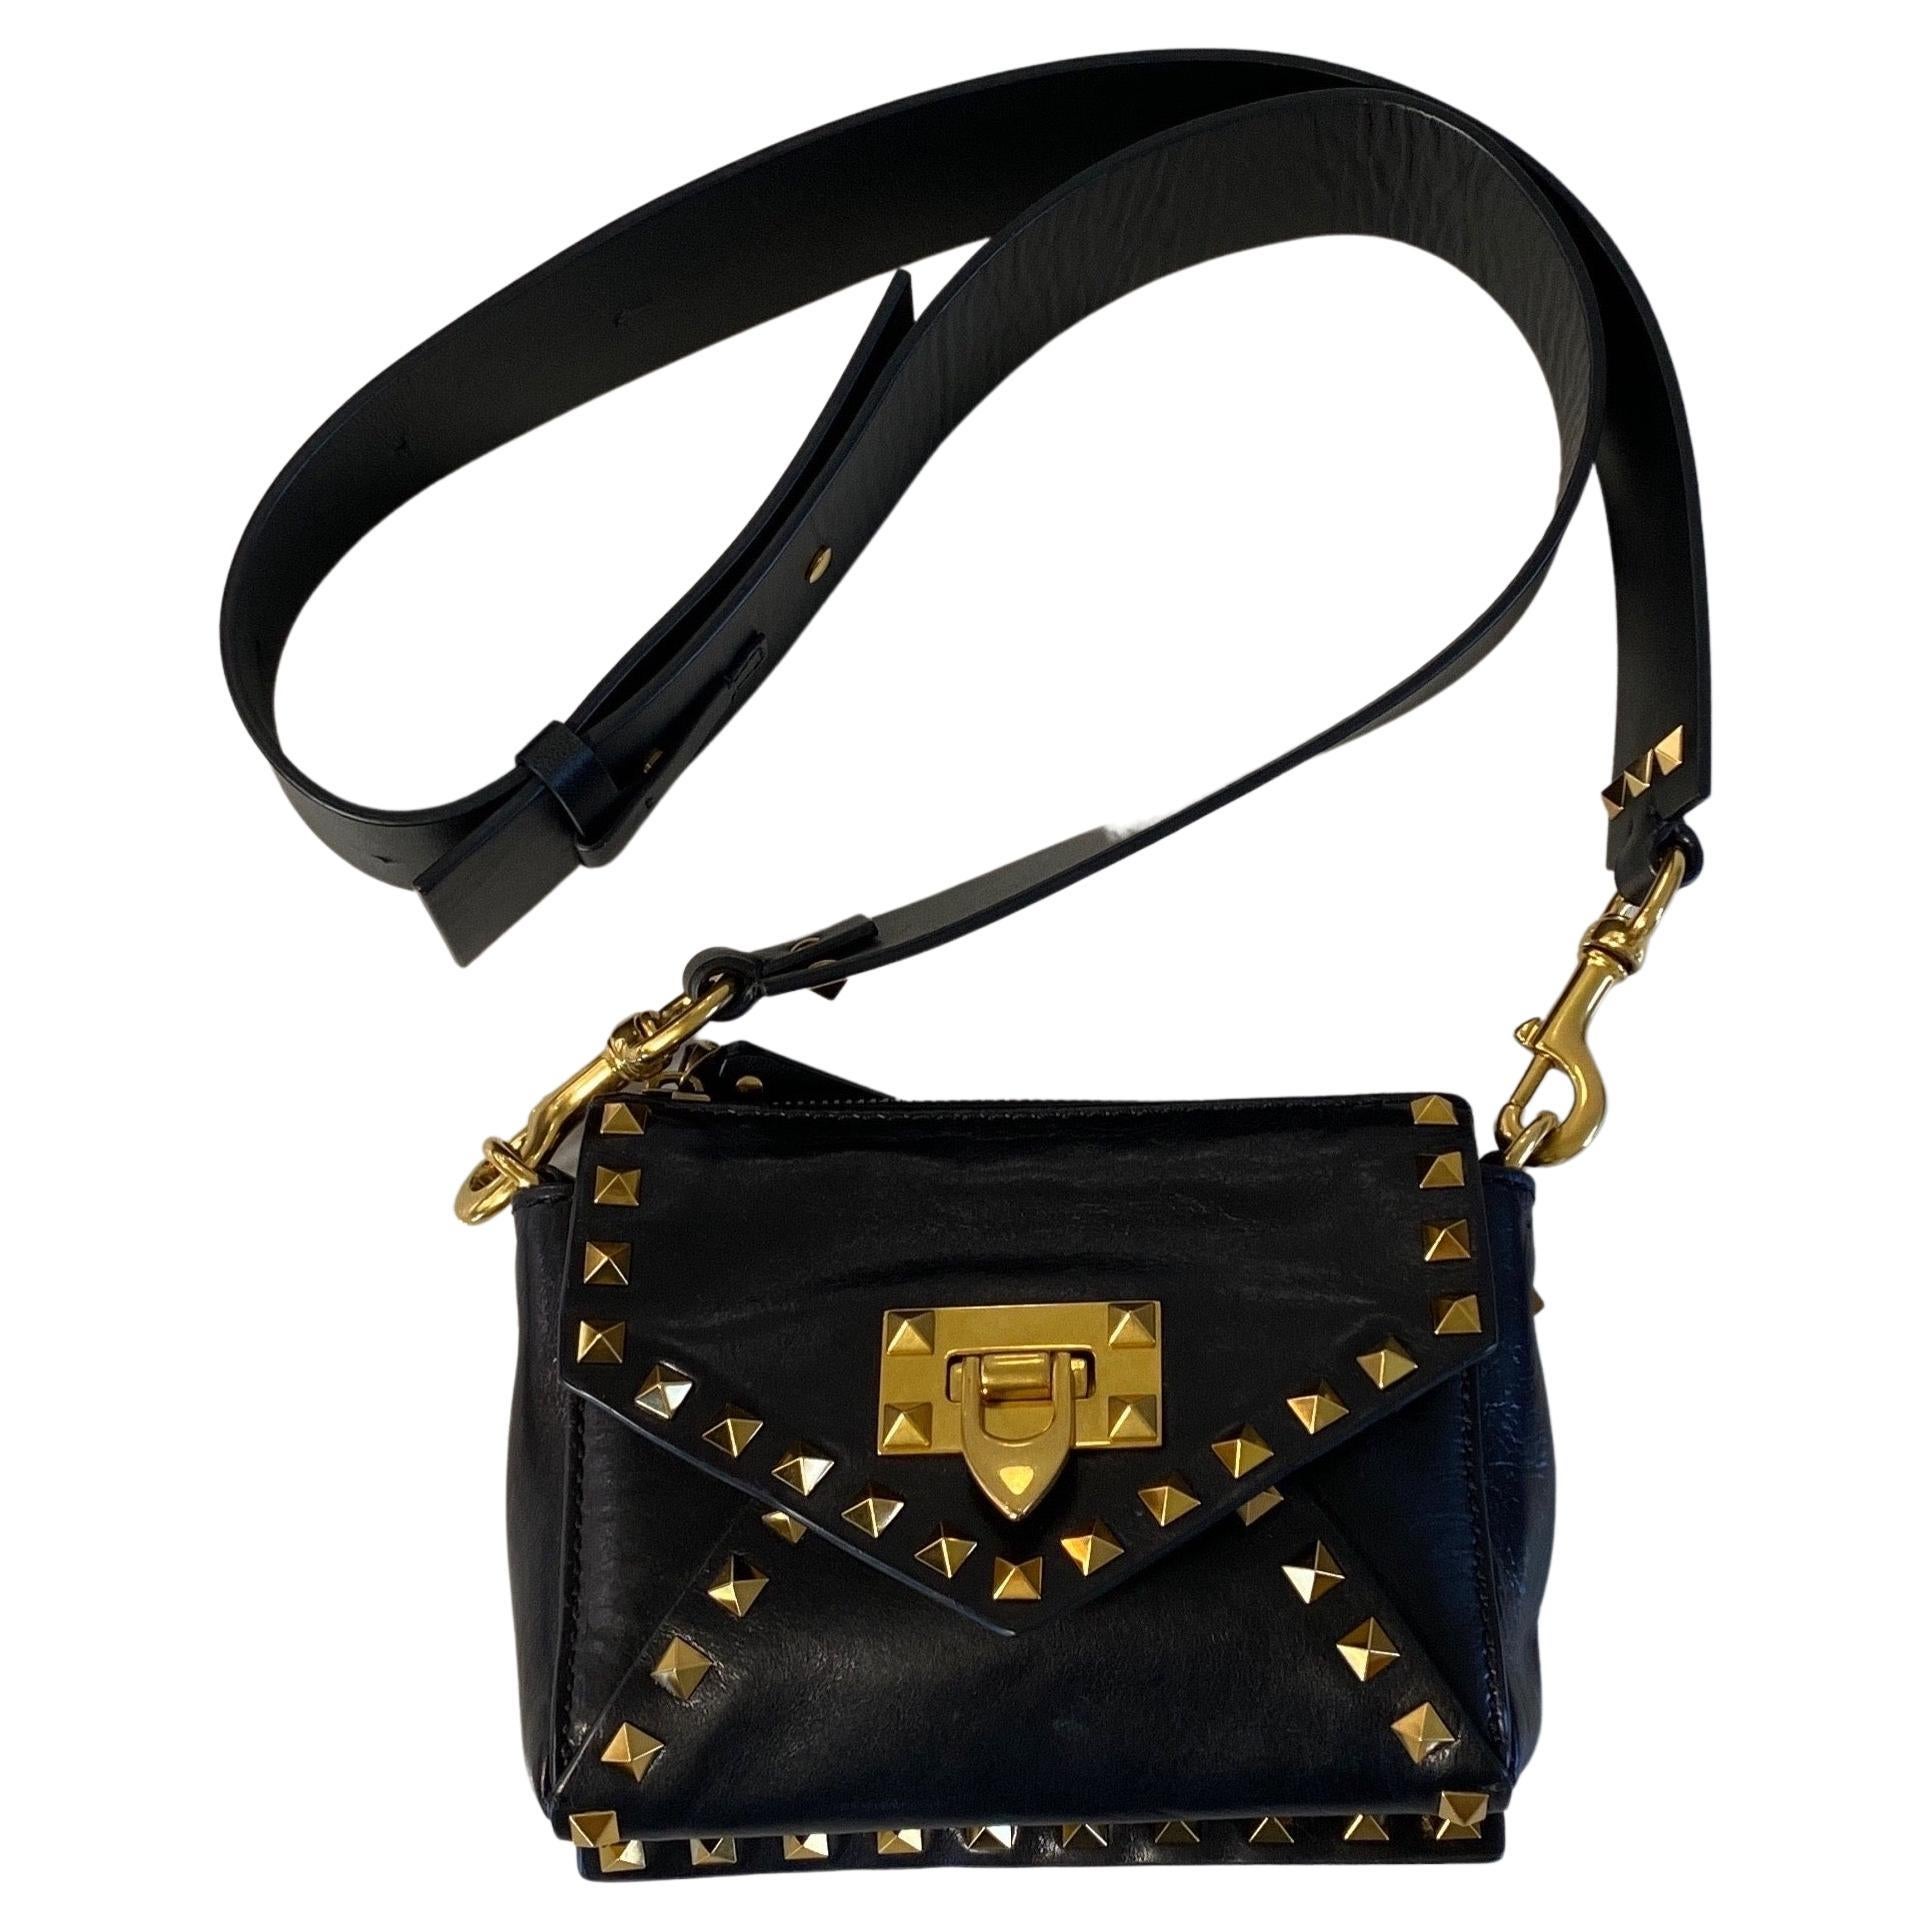 Valentino Black Small Rock Stud Calf Leather Crossbody Bag with Wide Strap